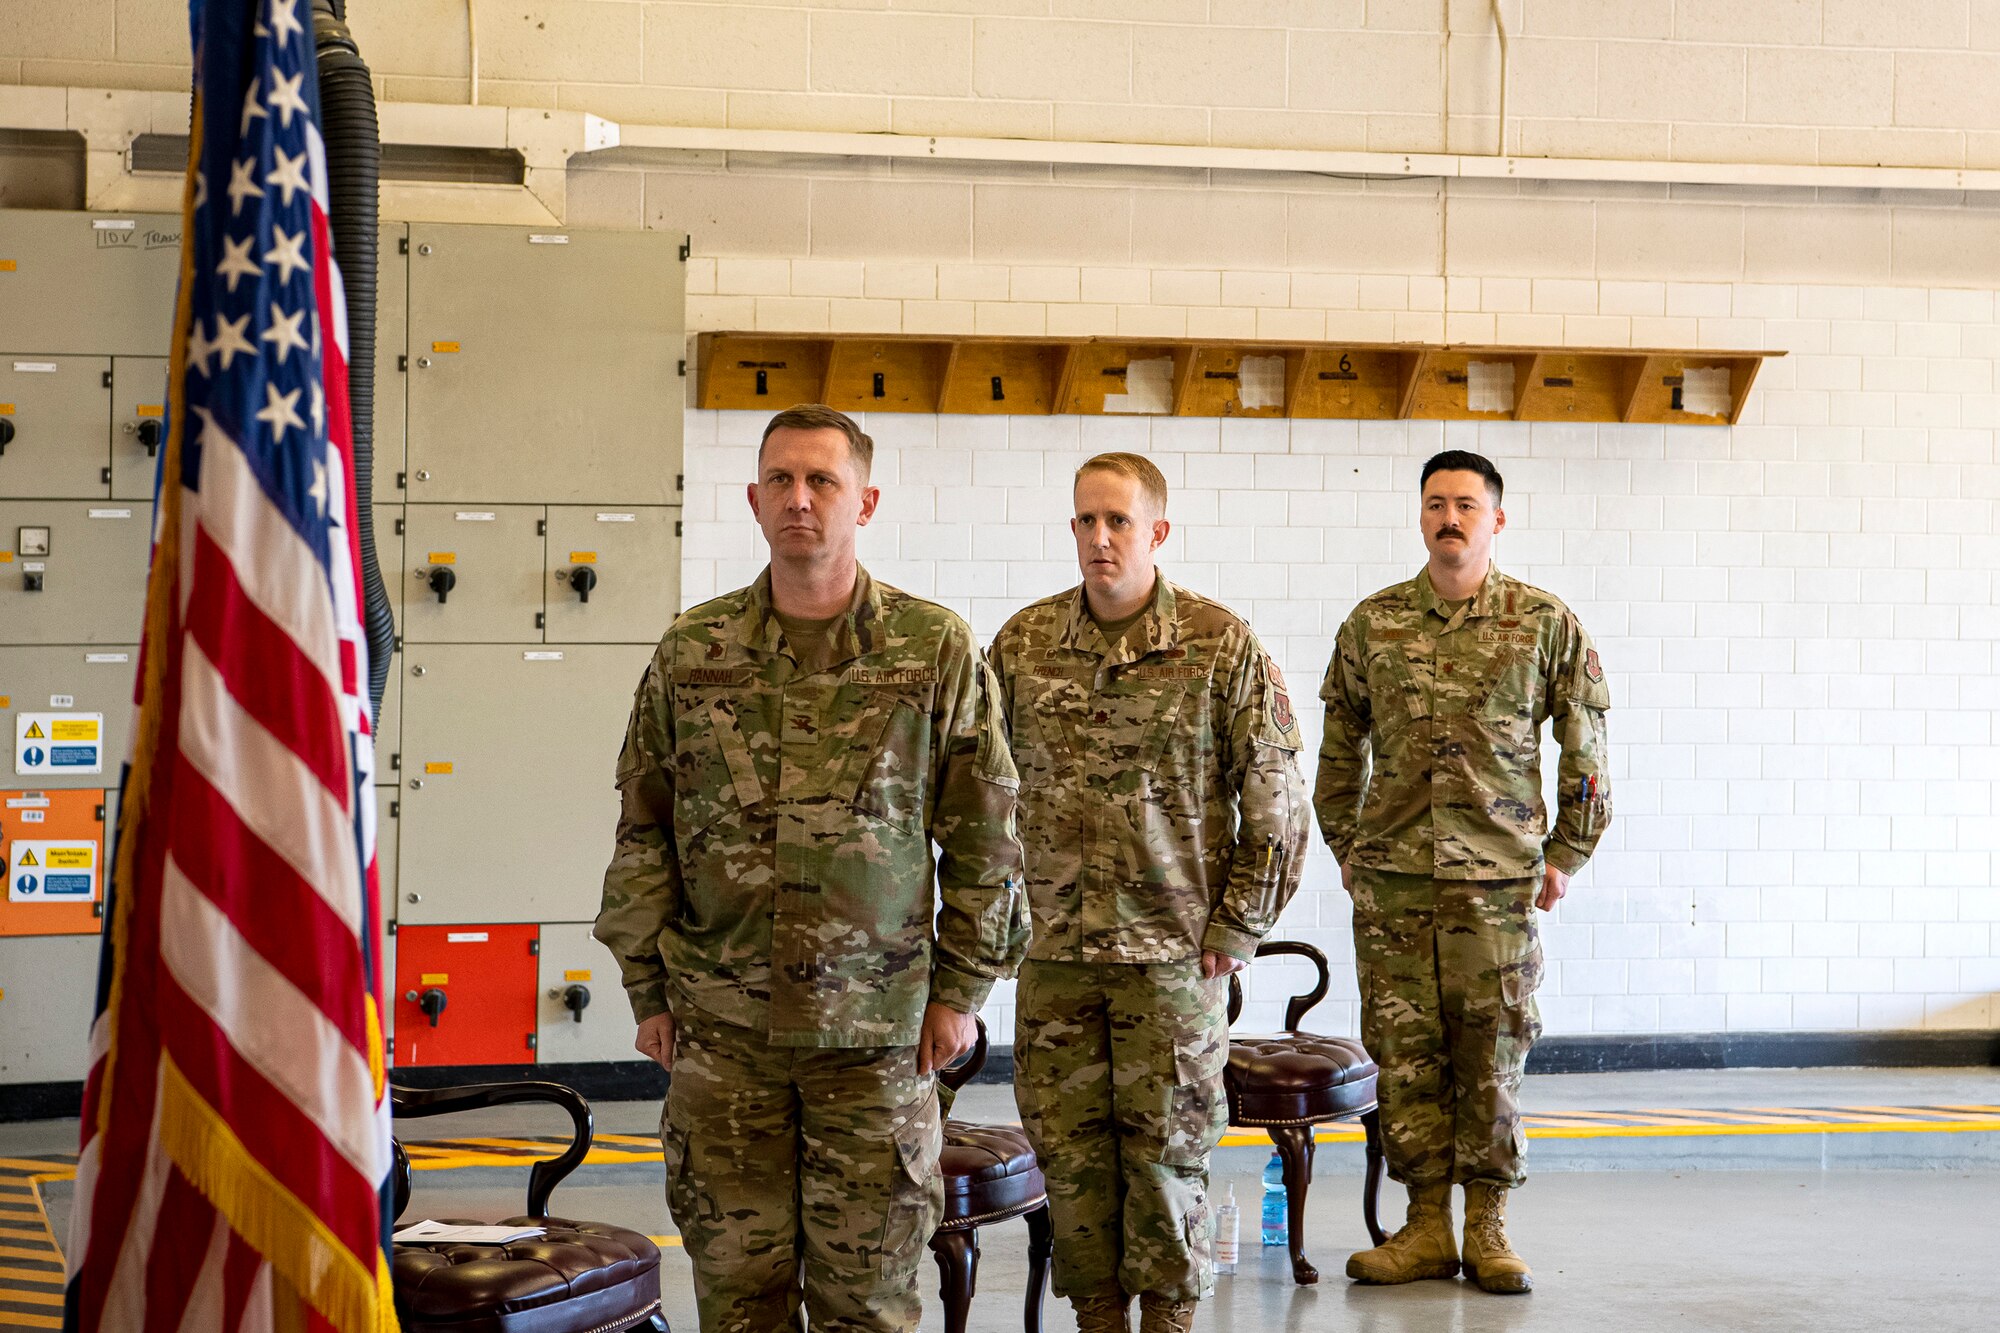 U.S. Air Force Col. Jon T. Hannah, left, 422d Air Base Group commander, Maj. Kenneth French, center, 420th Munitions Squadron (MUNS) outgoing commander, and Maj. Christopher Wood, right, 420th MUNS incoming commander, stand at attention for the playing of the national anthem during a change of command ceremony at RAF Welford, England, July 10, 2020. The change of command ceremony is a military tradition that represents a formal transfer of a unit’s authority and responsibility from one commander to another. (U.S. Air Force photo by Senior Airman Eugene Oliver)